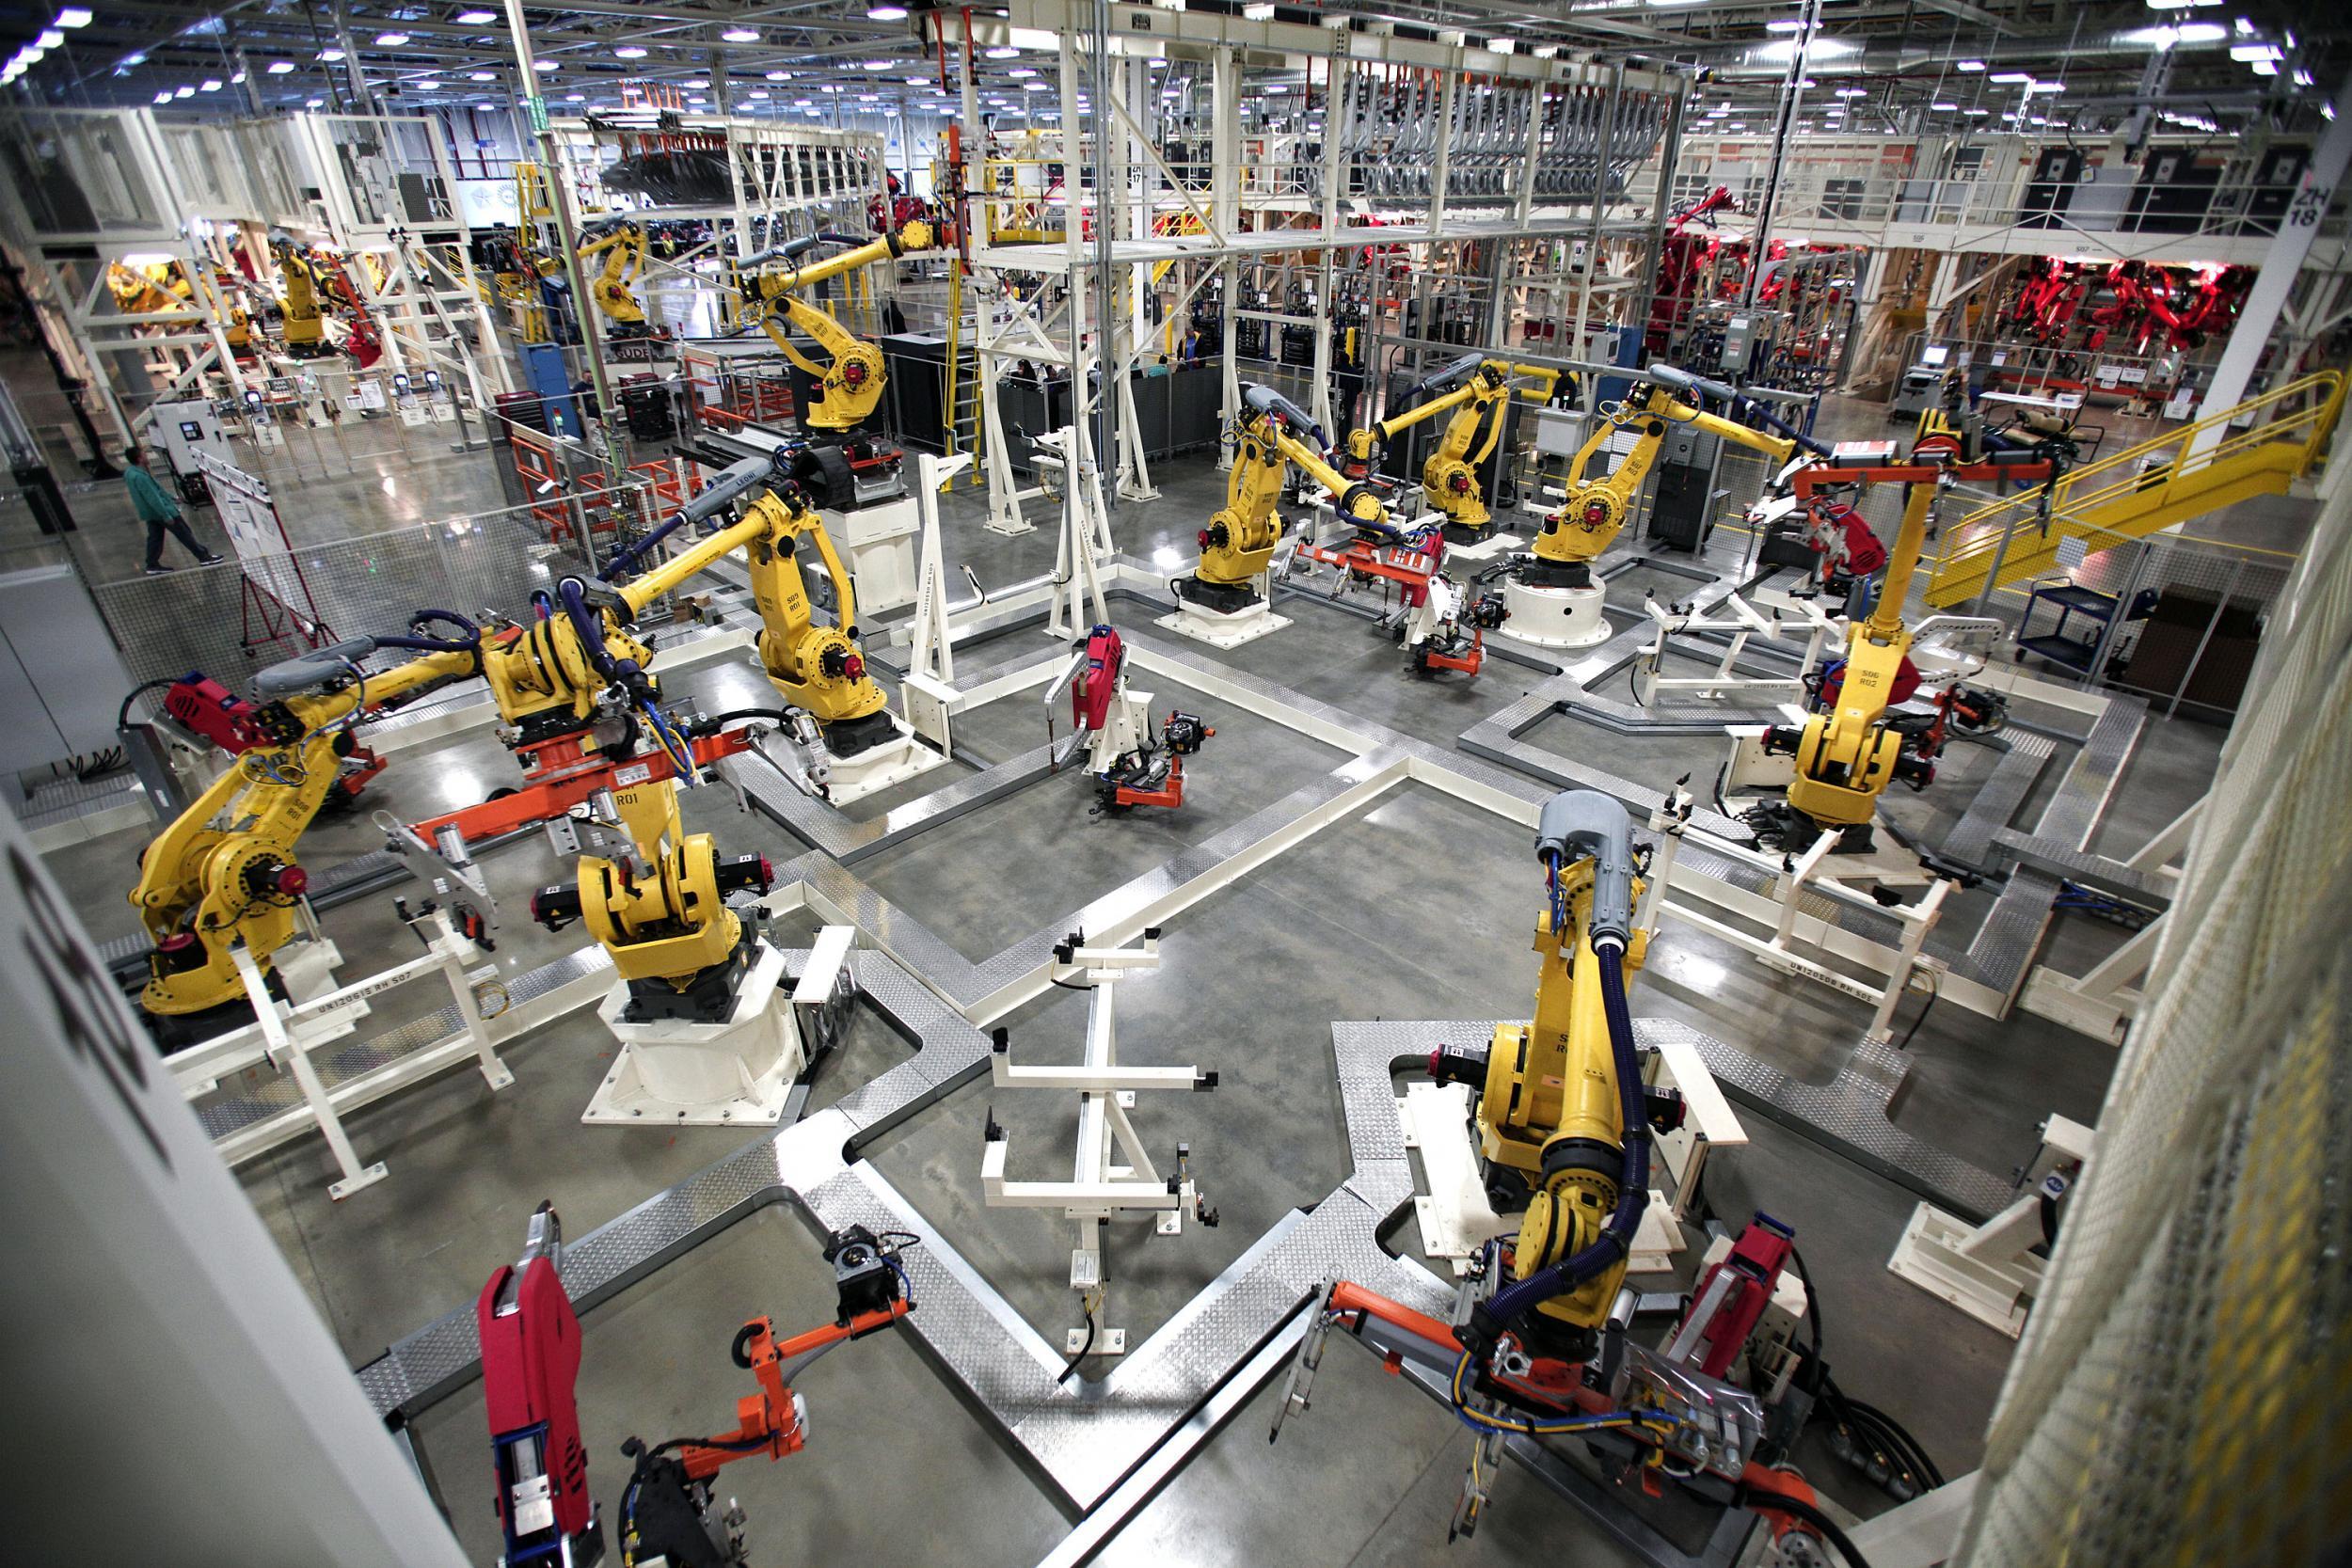 Automation and technological advances have already replaced humans in many jobs, with much of this Chrysler assembly line being run by robots